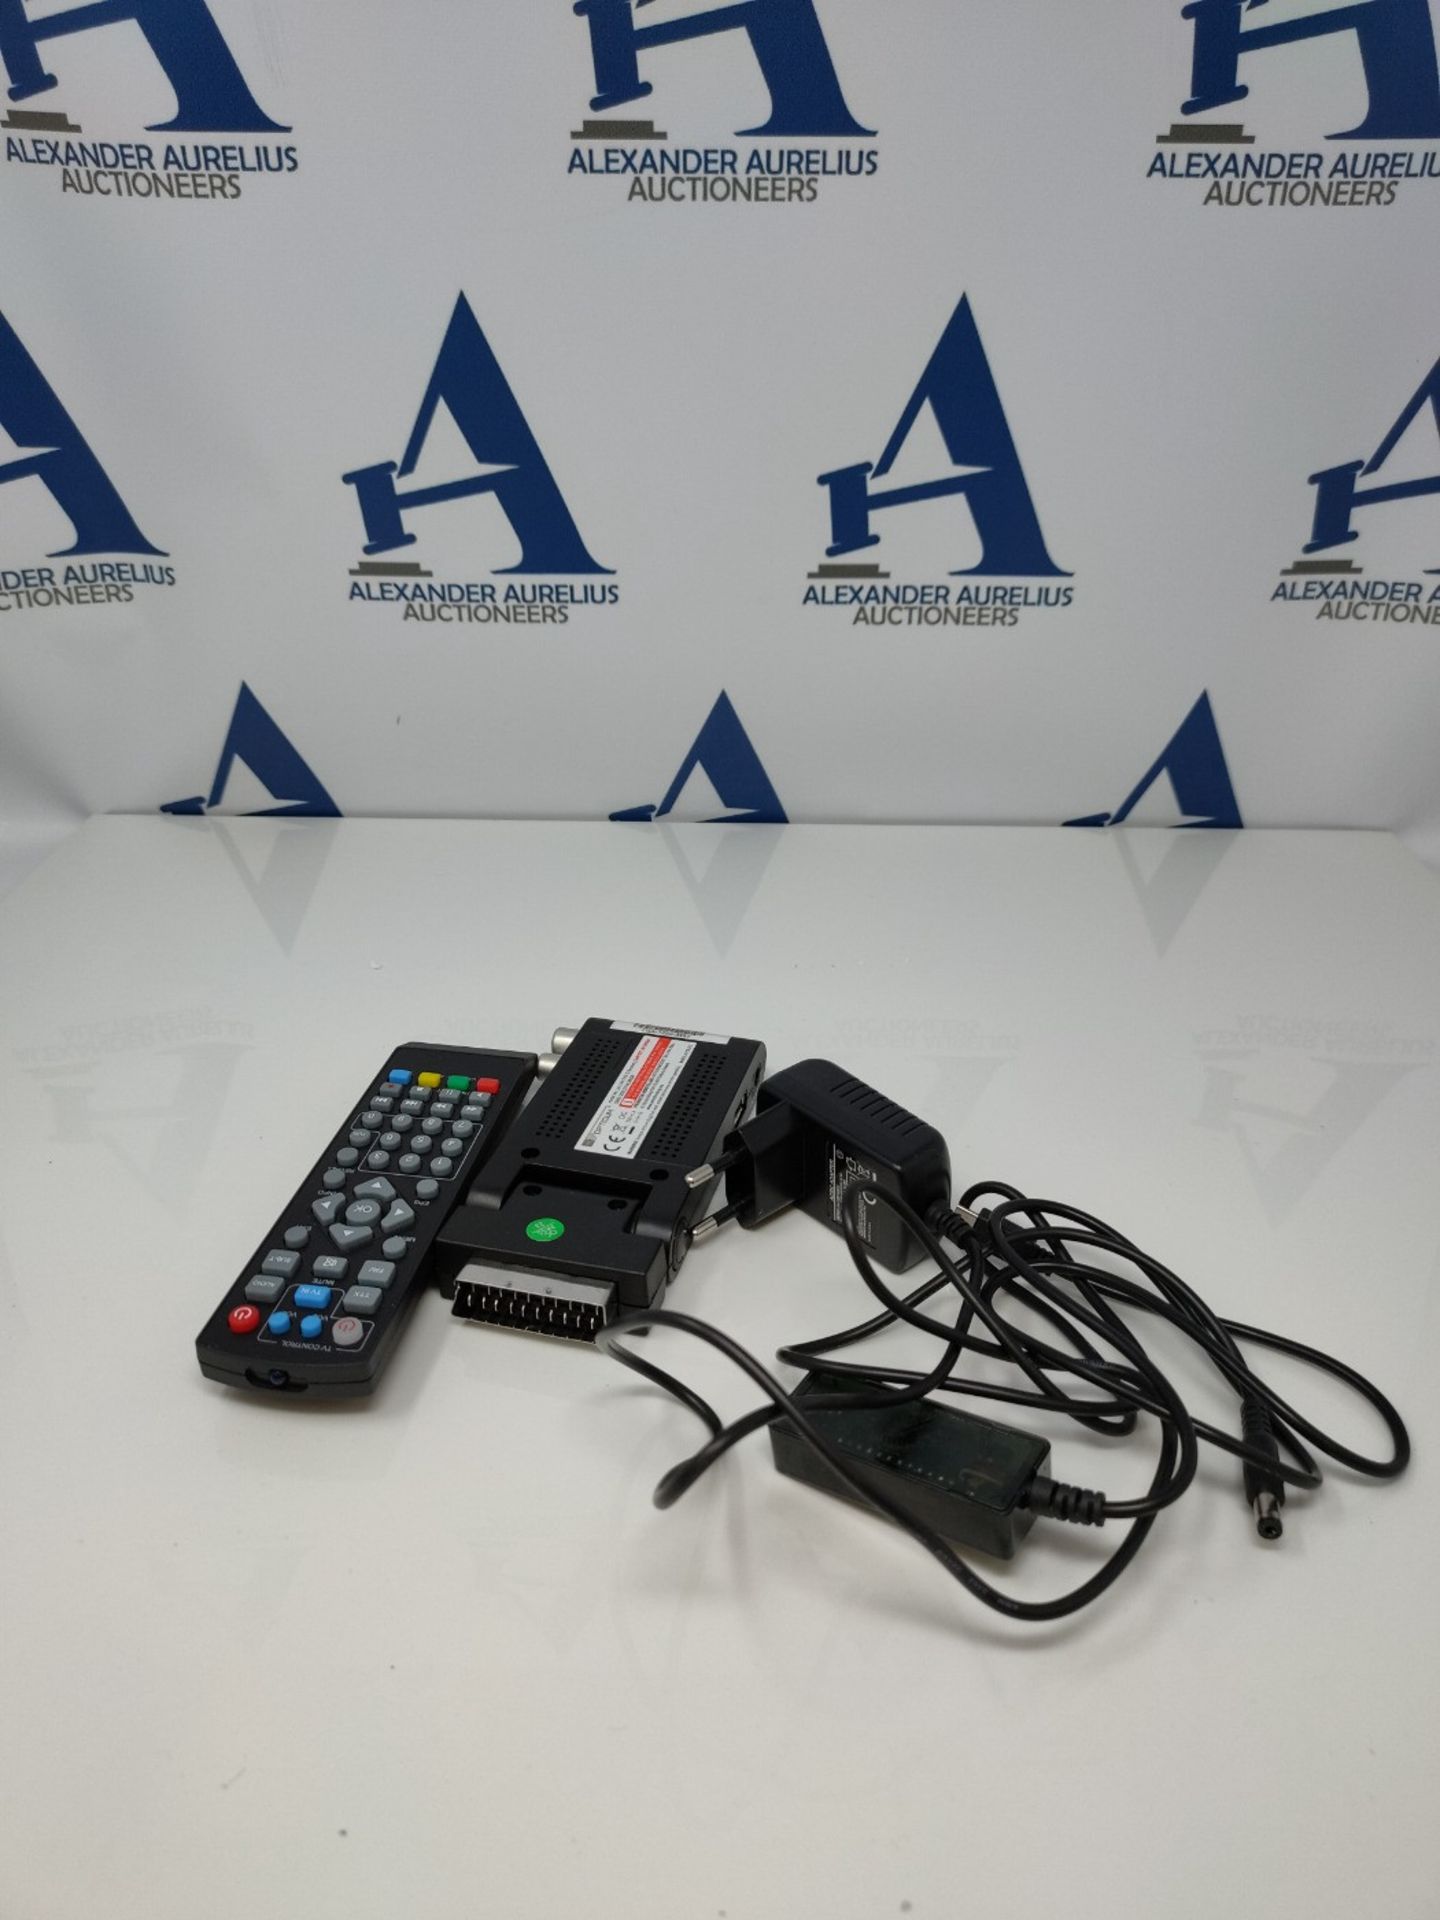 RED OPTICUM AX Lion 5 Air DVB-T2 H.265 Receiver with Recording Function - External IR - Image 3 of 3